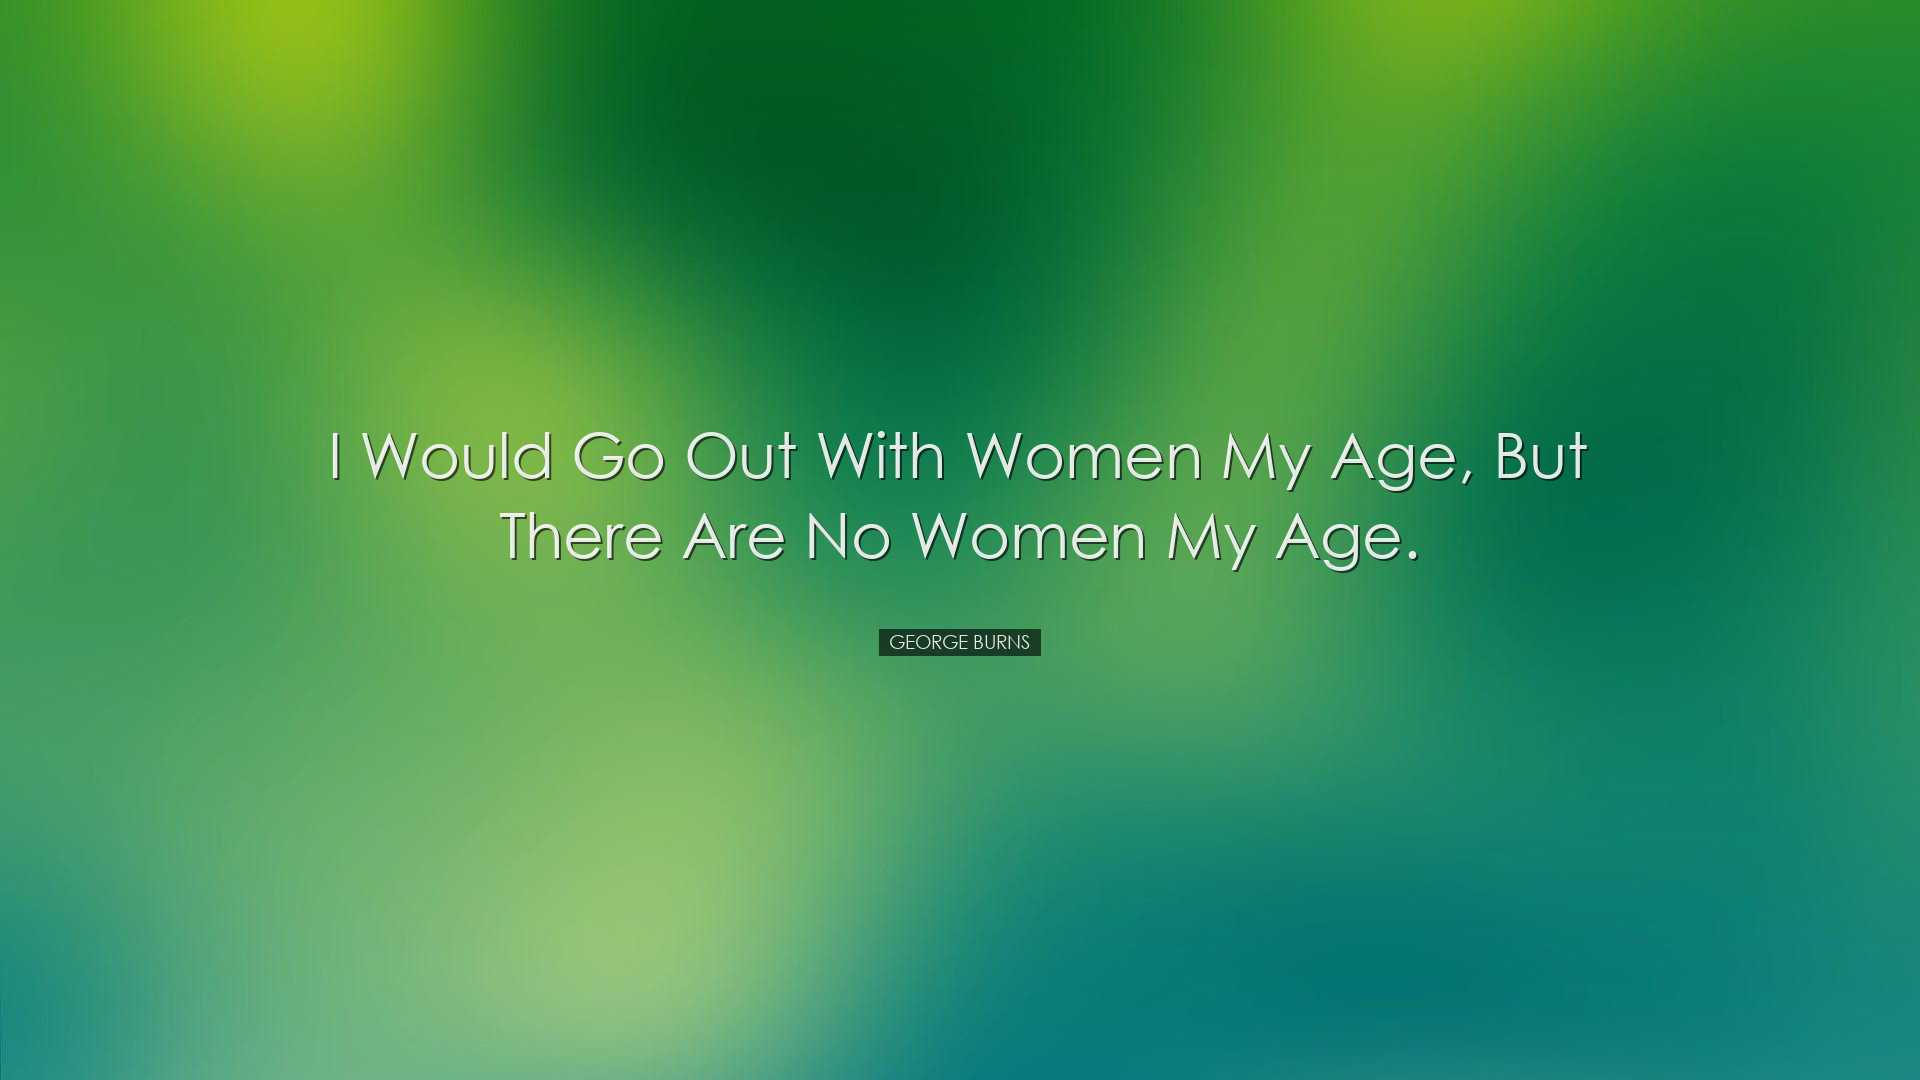 I would go out with women my age, but there are no women my age. -